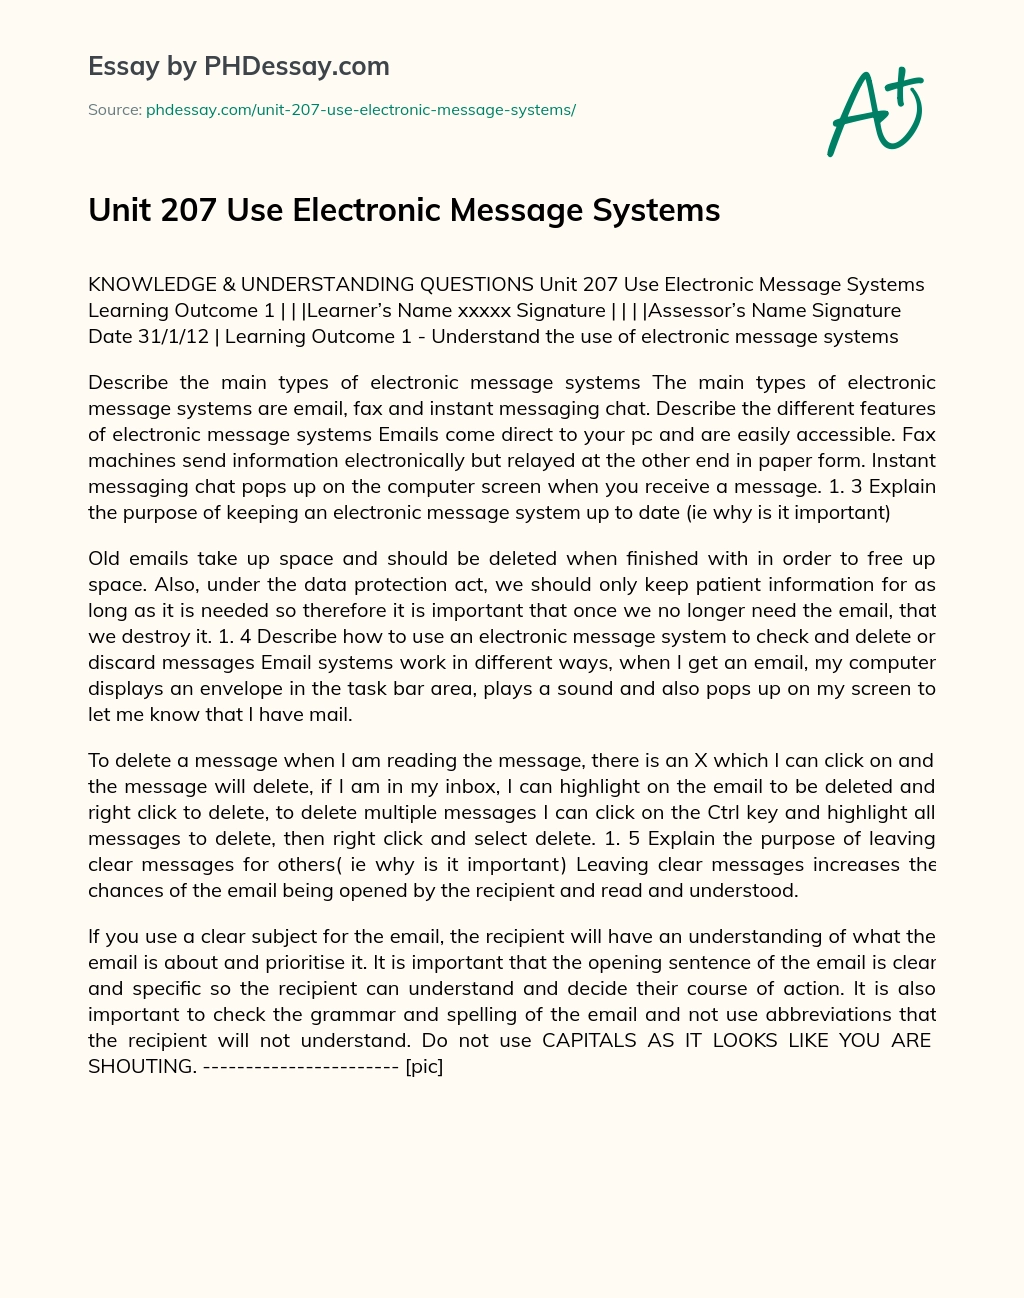 Unit 207 Use Electronic Message Systems essay